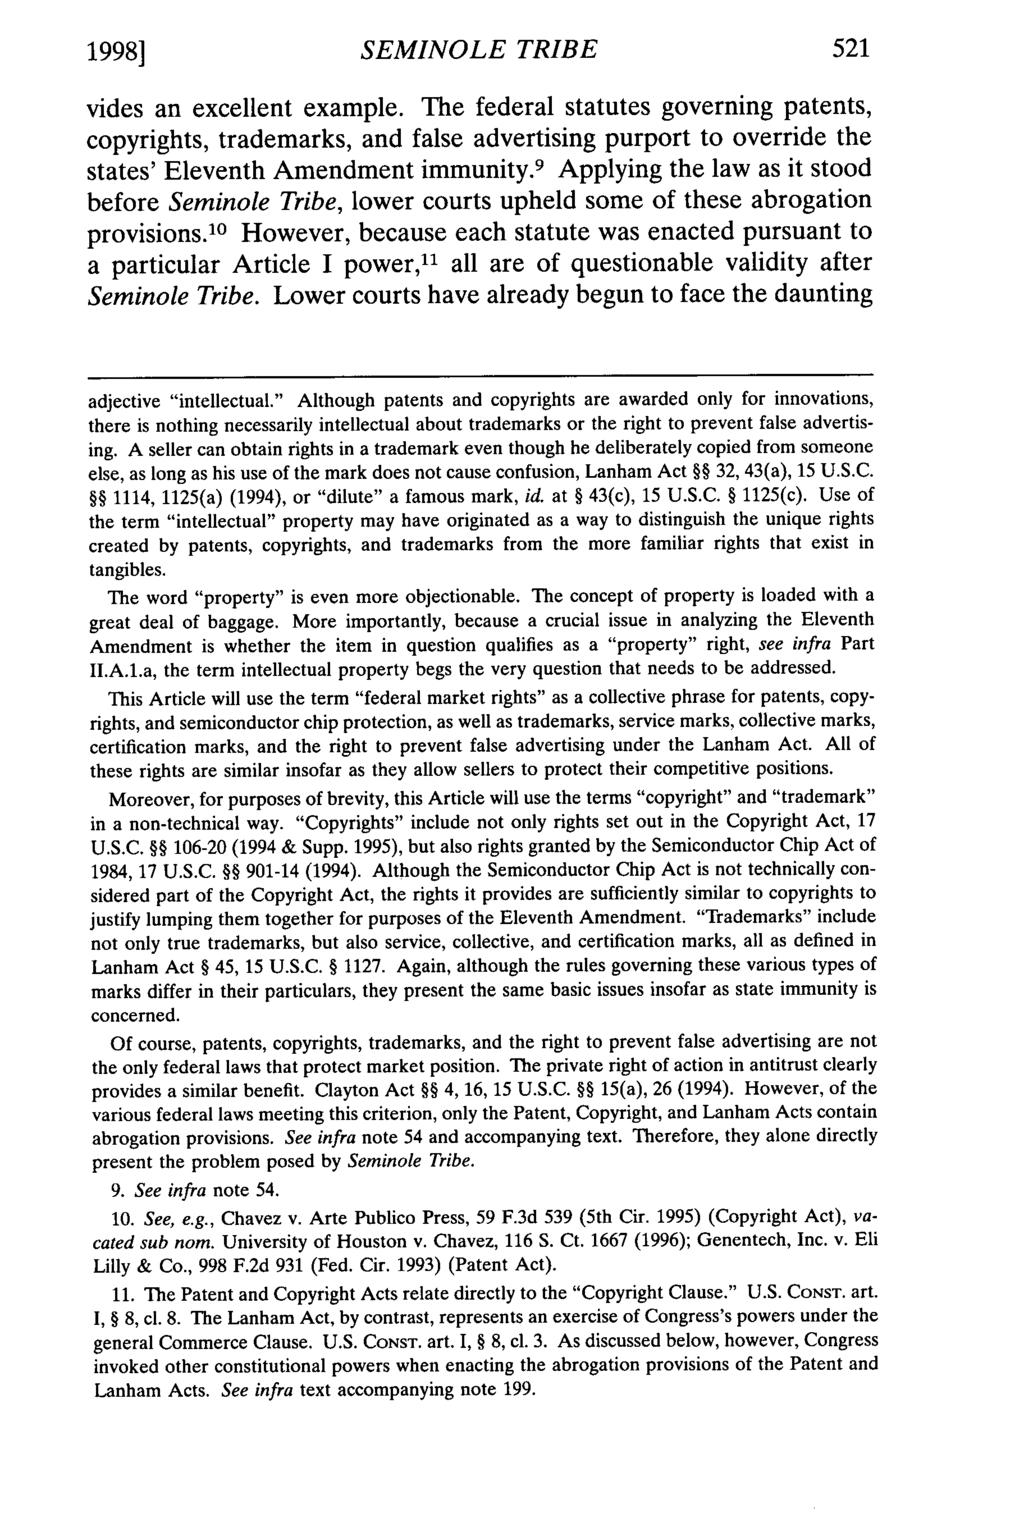 1998] SEMINOLE TRIBE vides an excellent example. The federal statutes governing patents, copyrights, trademarks, and false advertising purport to override the states' Eleventh Amendment immunity.